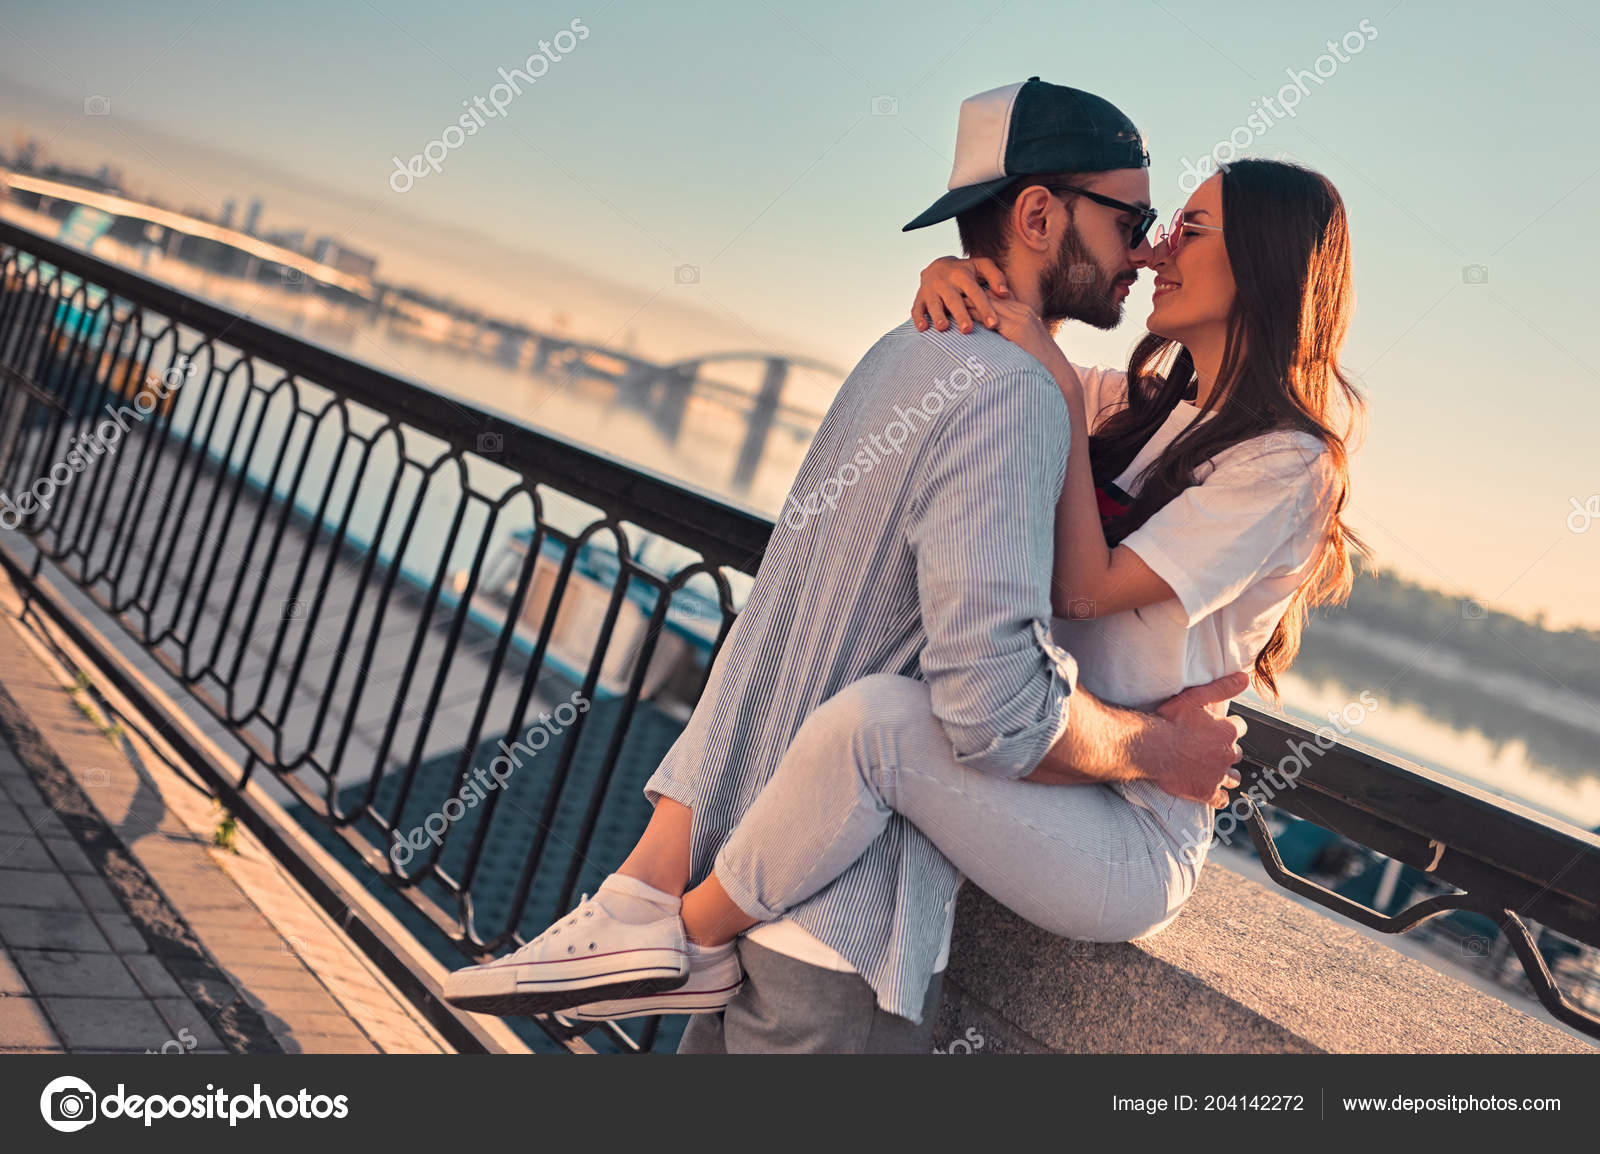 Incredible Compilation Of Over 999 Adorable Romantic Images In Stunning 4k Resolution